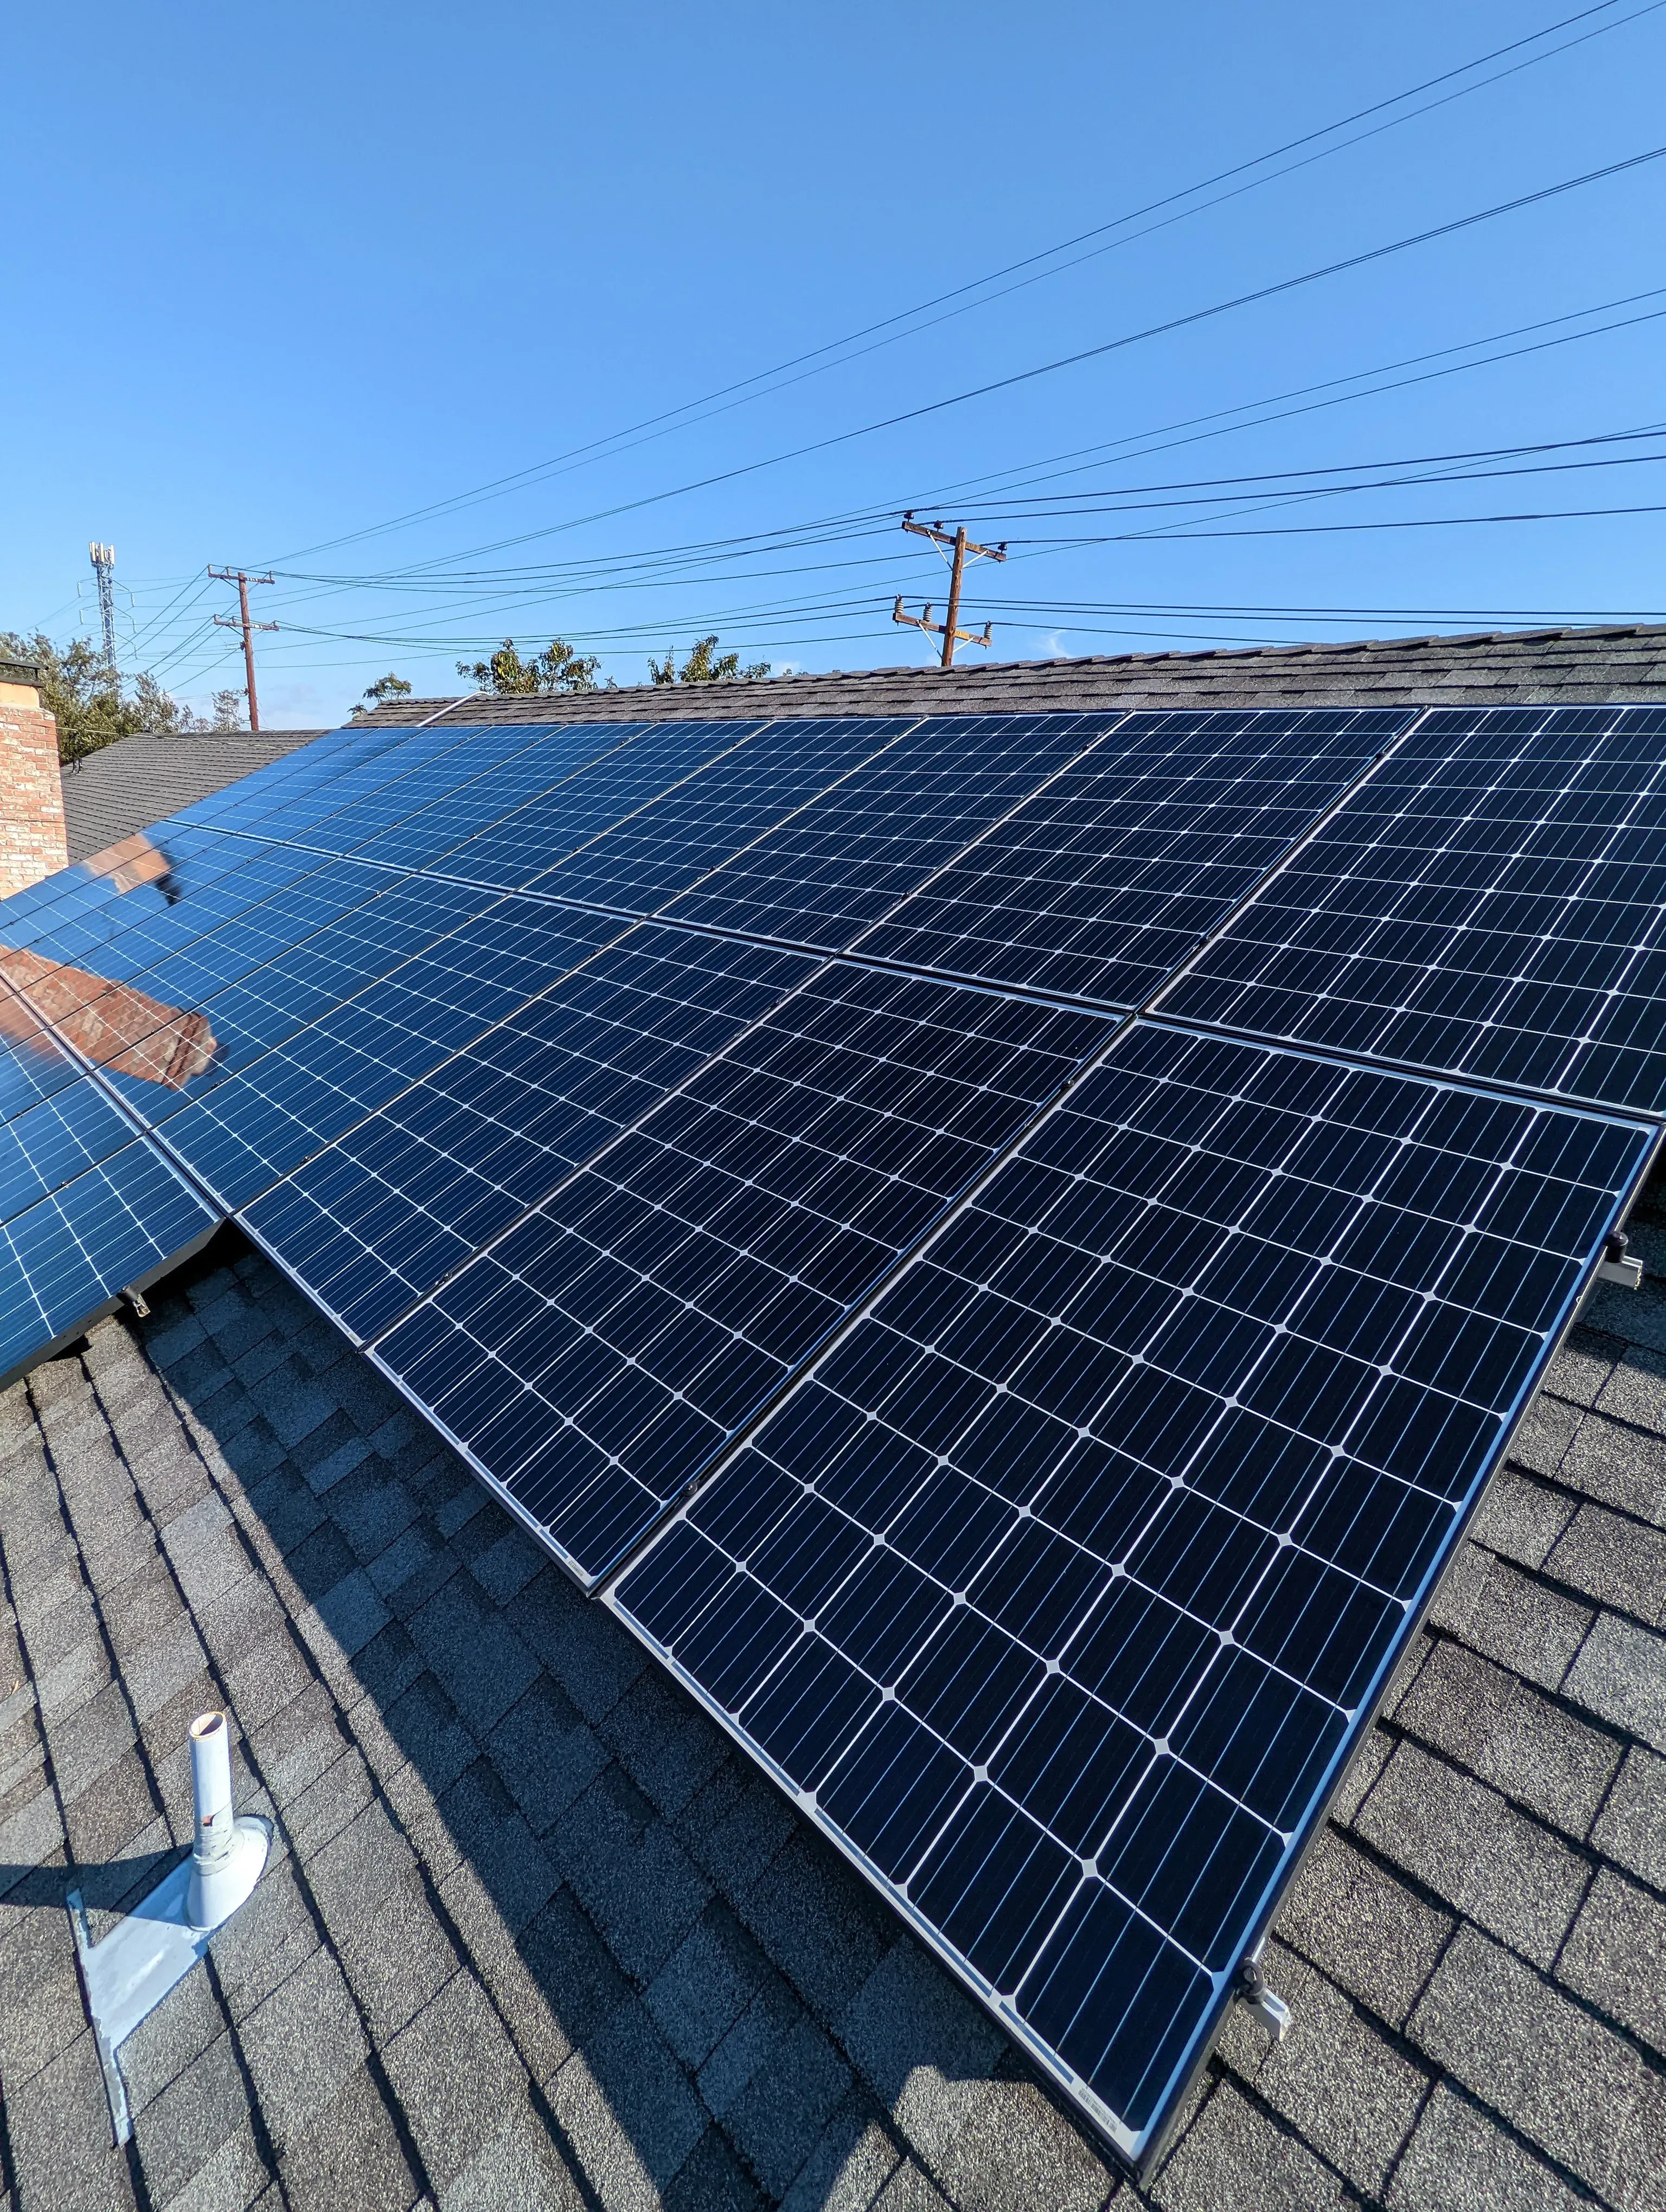 Solar panels after being cleaned in Gilroy, CA.